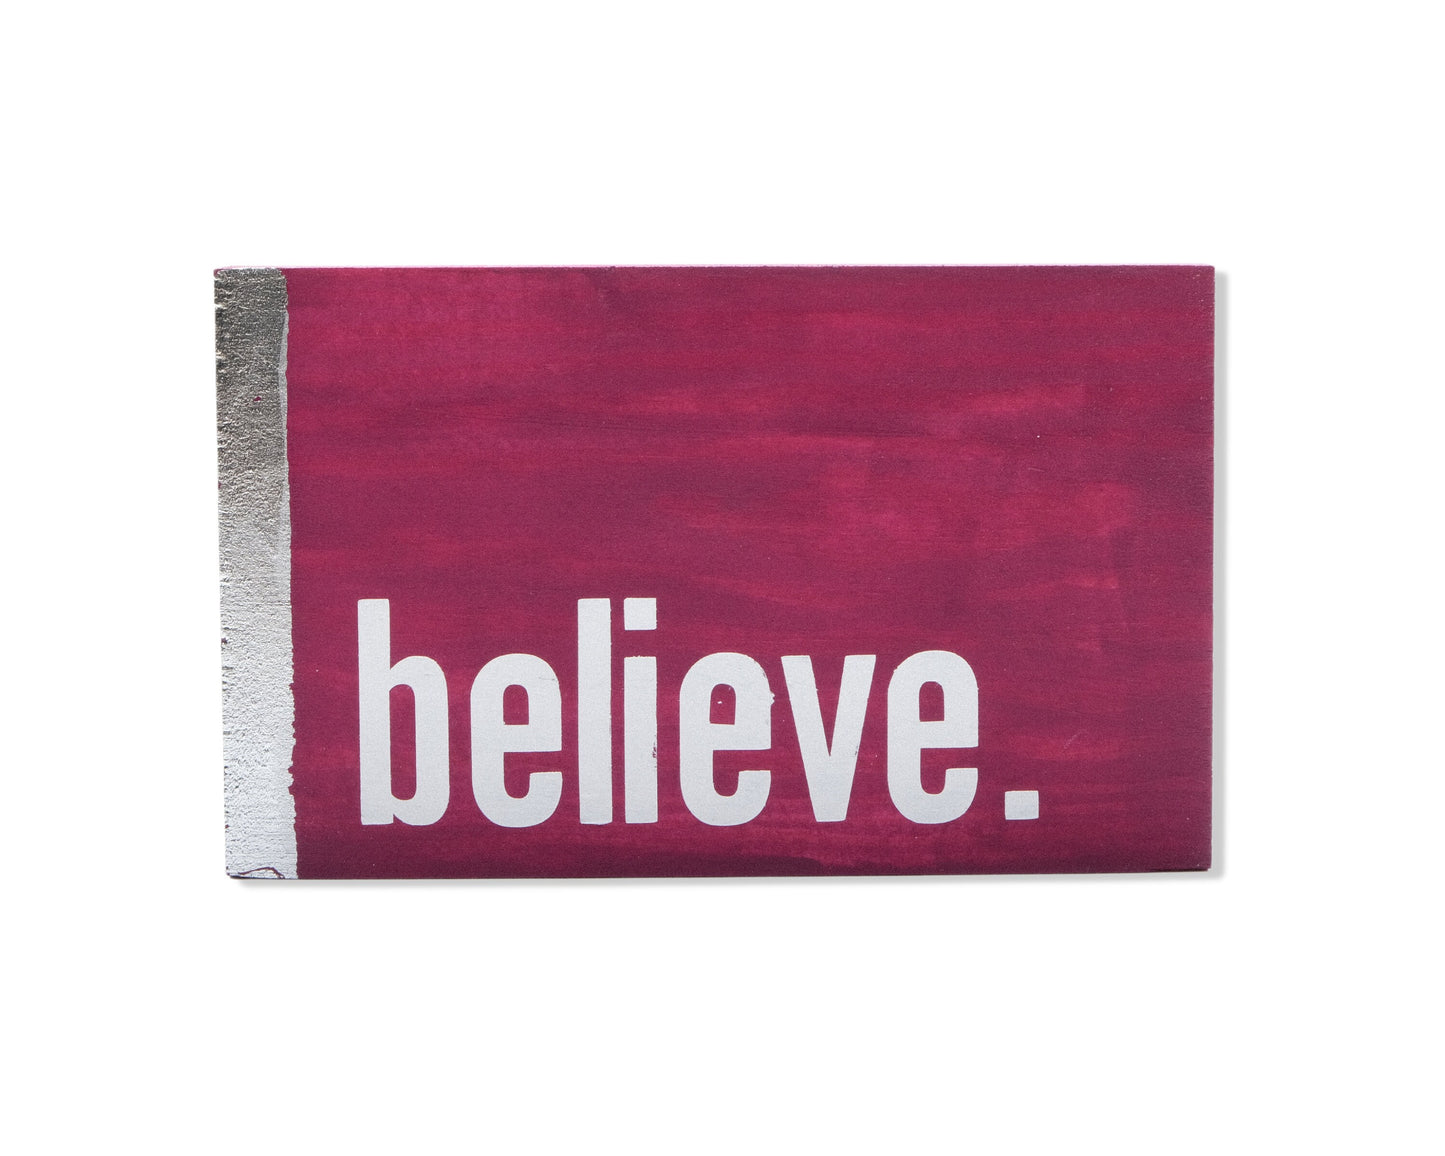 Small freestanding rectangular wooden sign facing straight on. Magenta wood stain with silver vertical border on left side. White painted message in chunky font with full stop, believe. Studio style photo with white background.